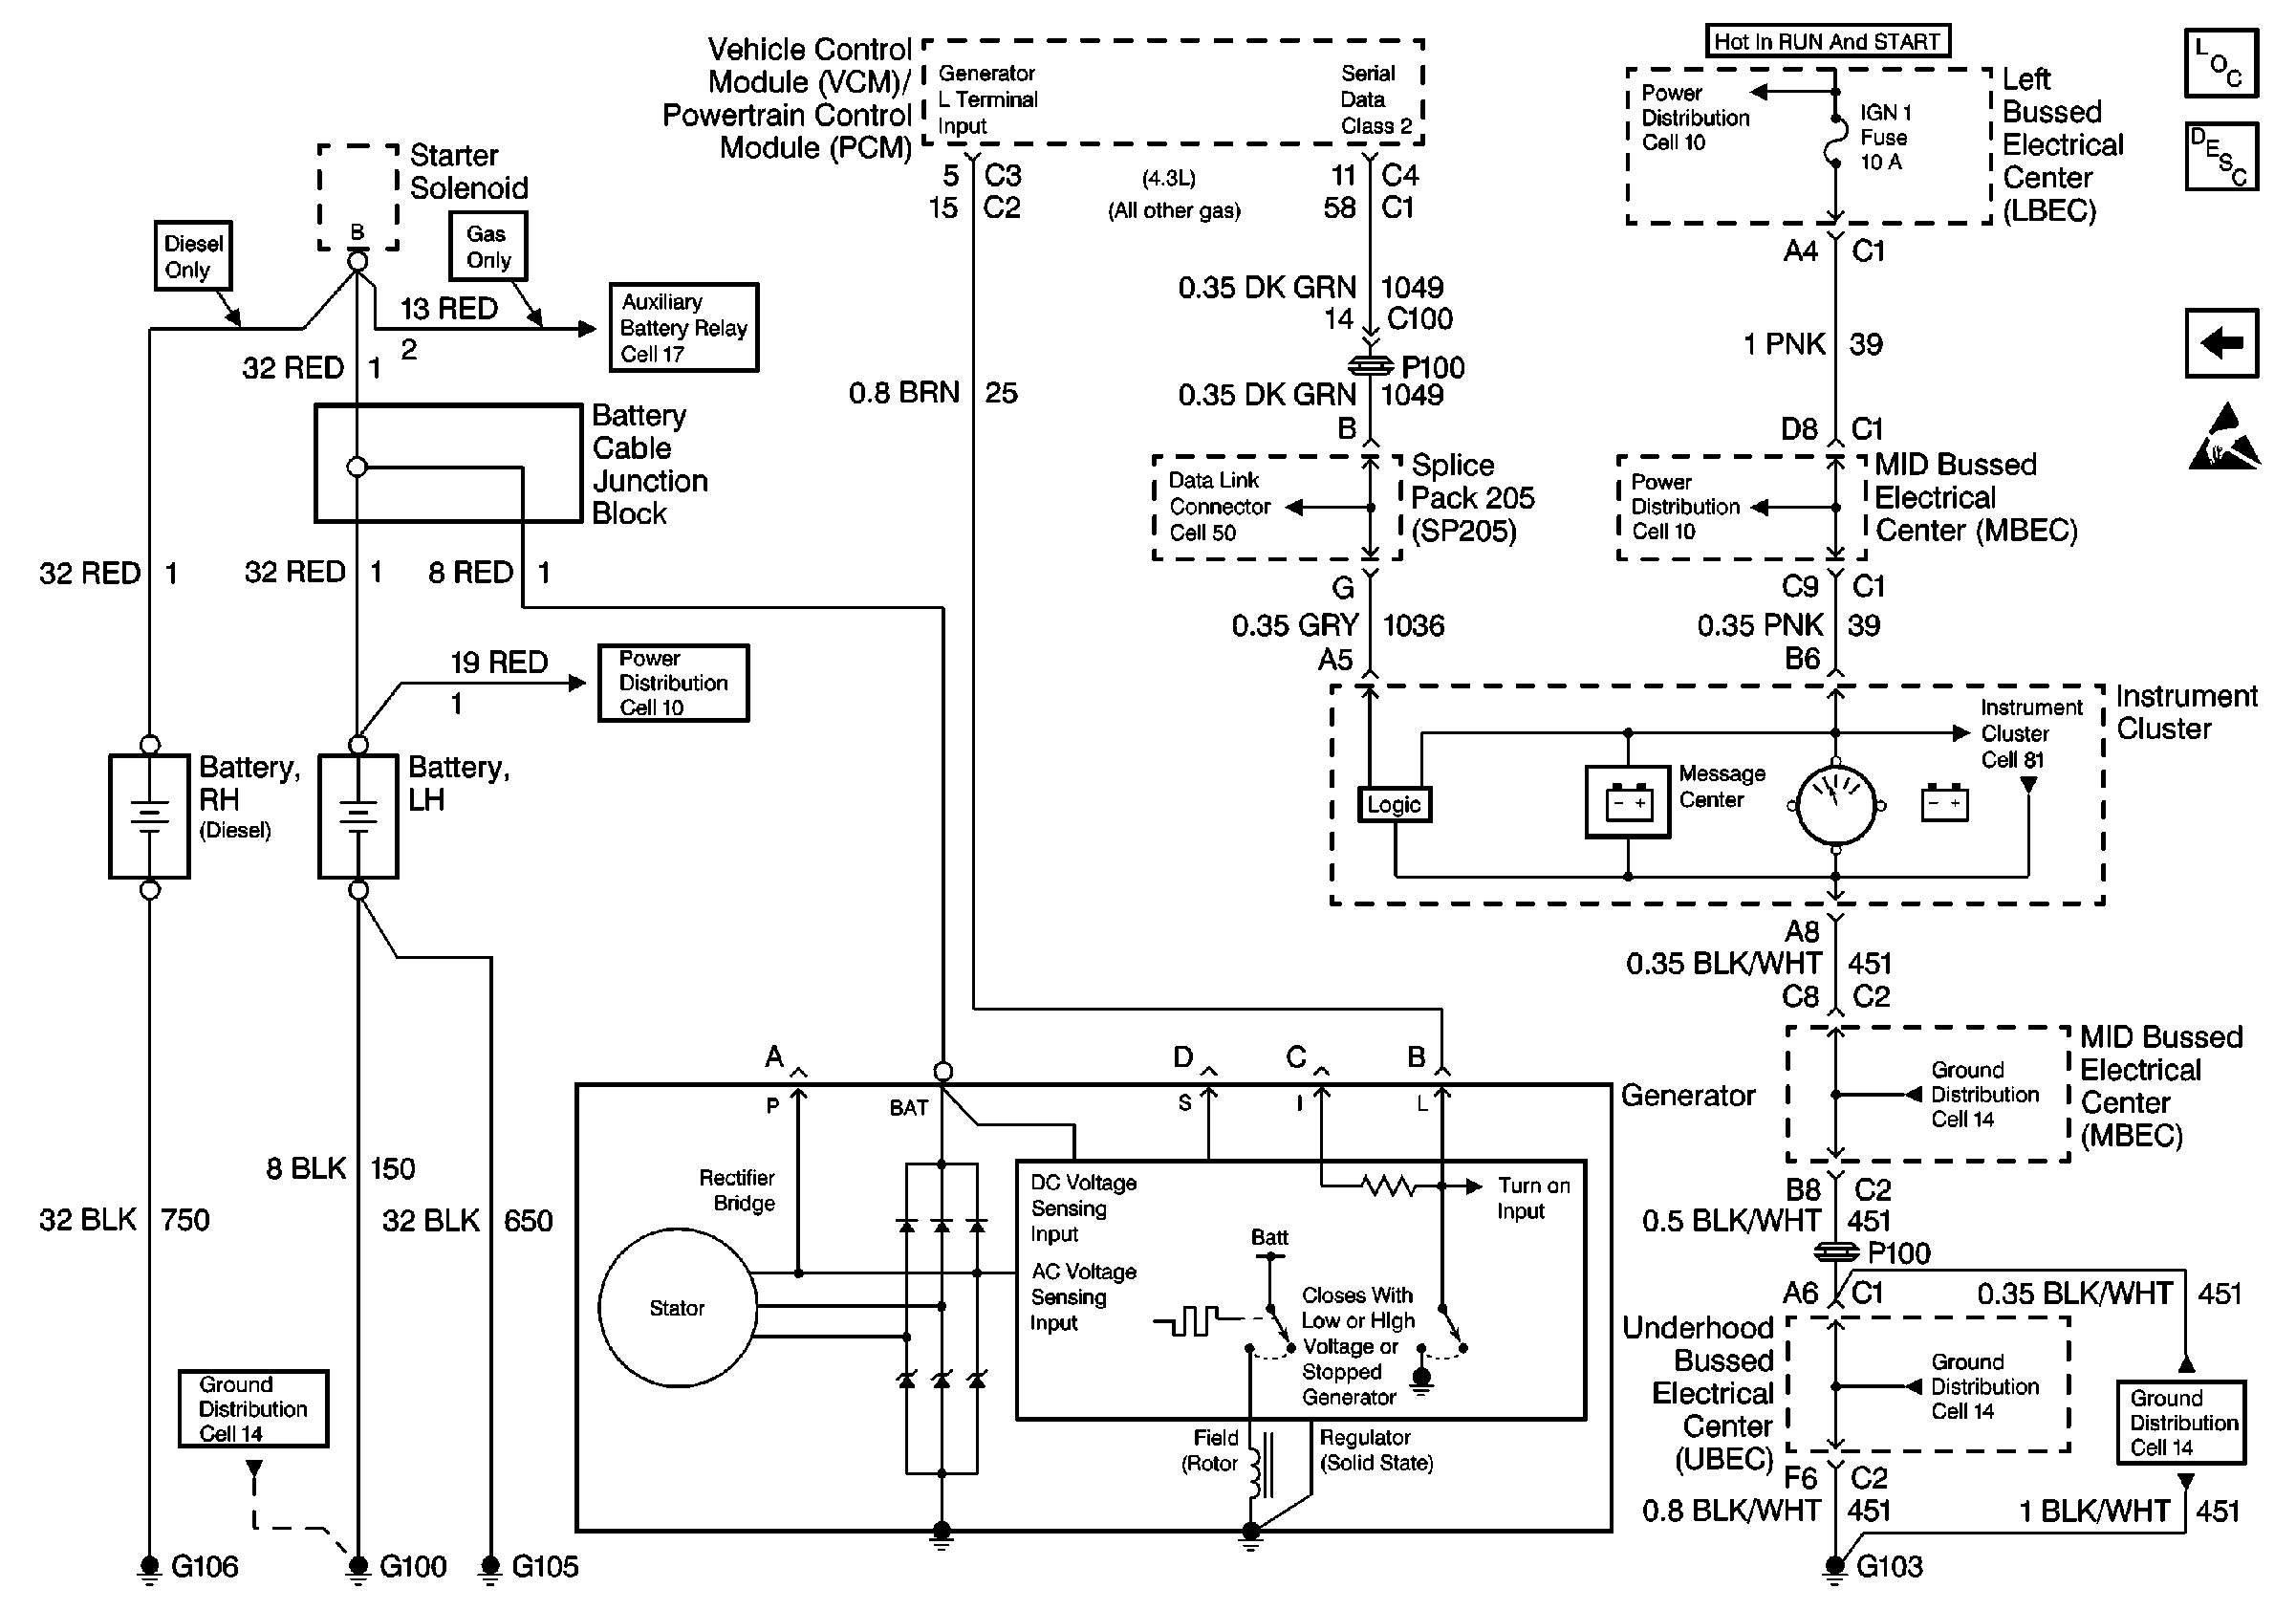 One Wire Alternator Wiring Diagram Chevy from ls1tech.com